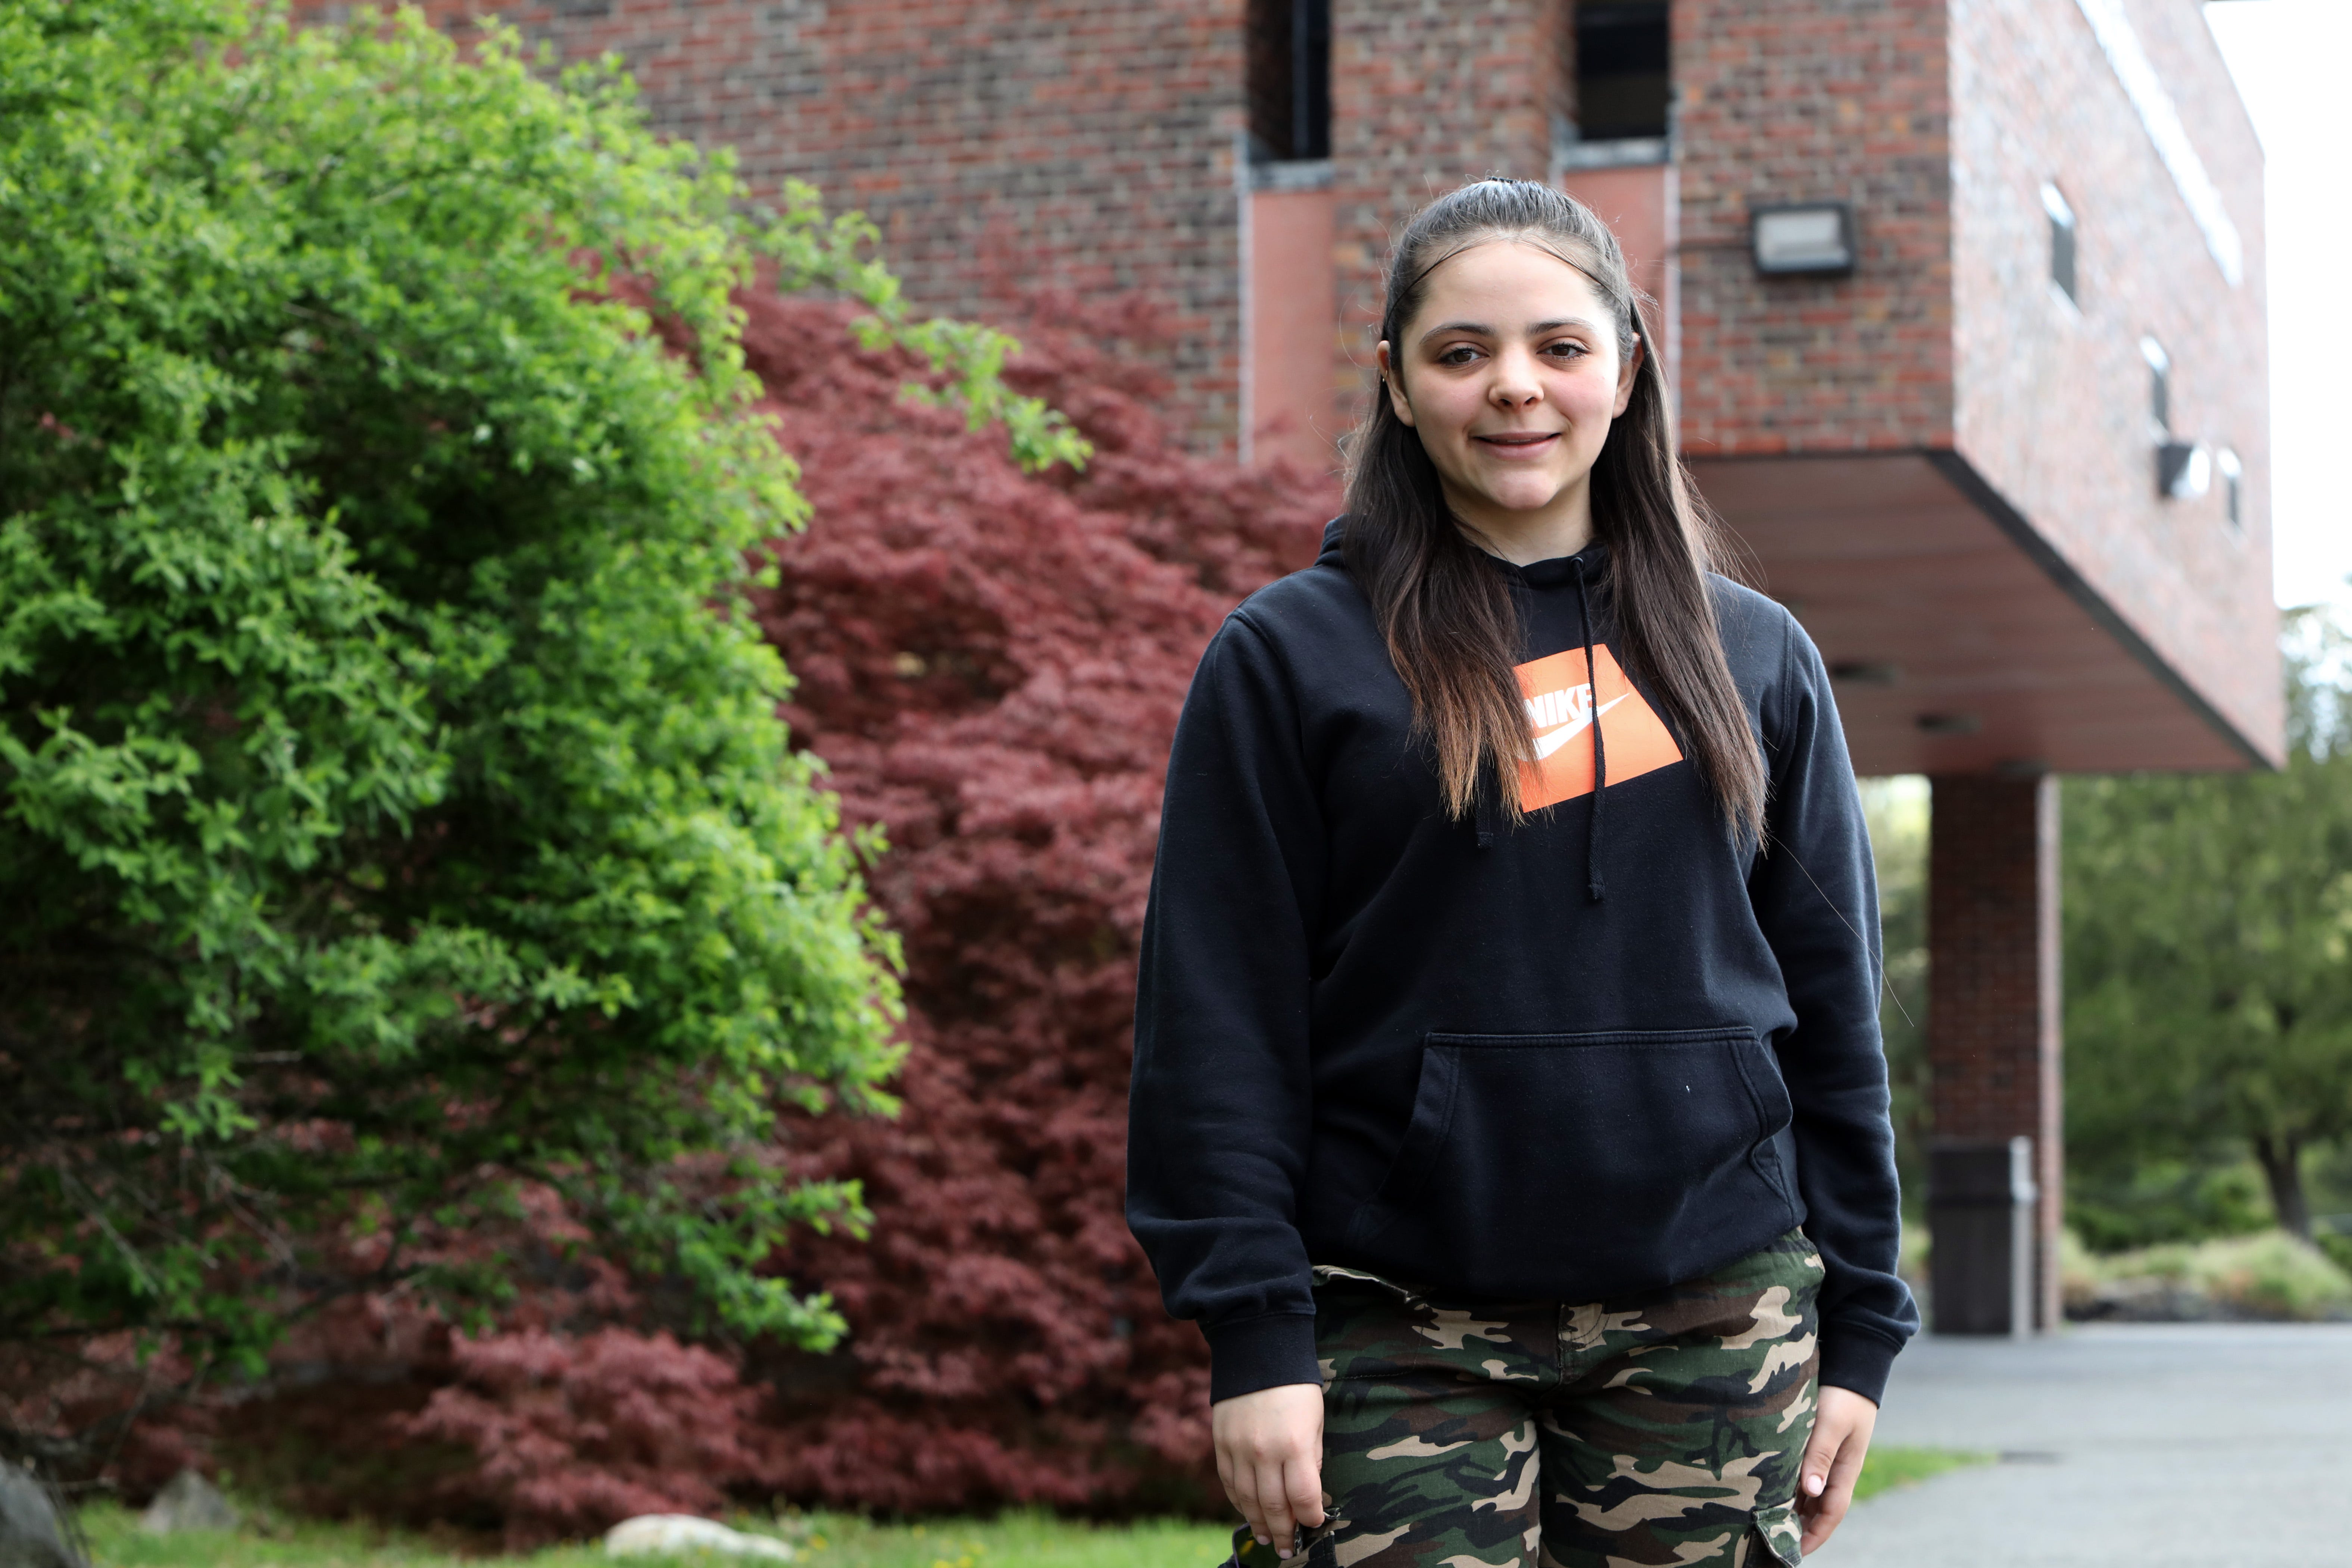 Graduating high school senior Nicole Hartmann hopes college will be a chance to make up for experiences she missed during the pandemic.